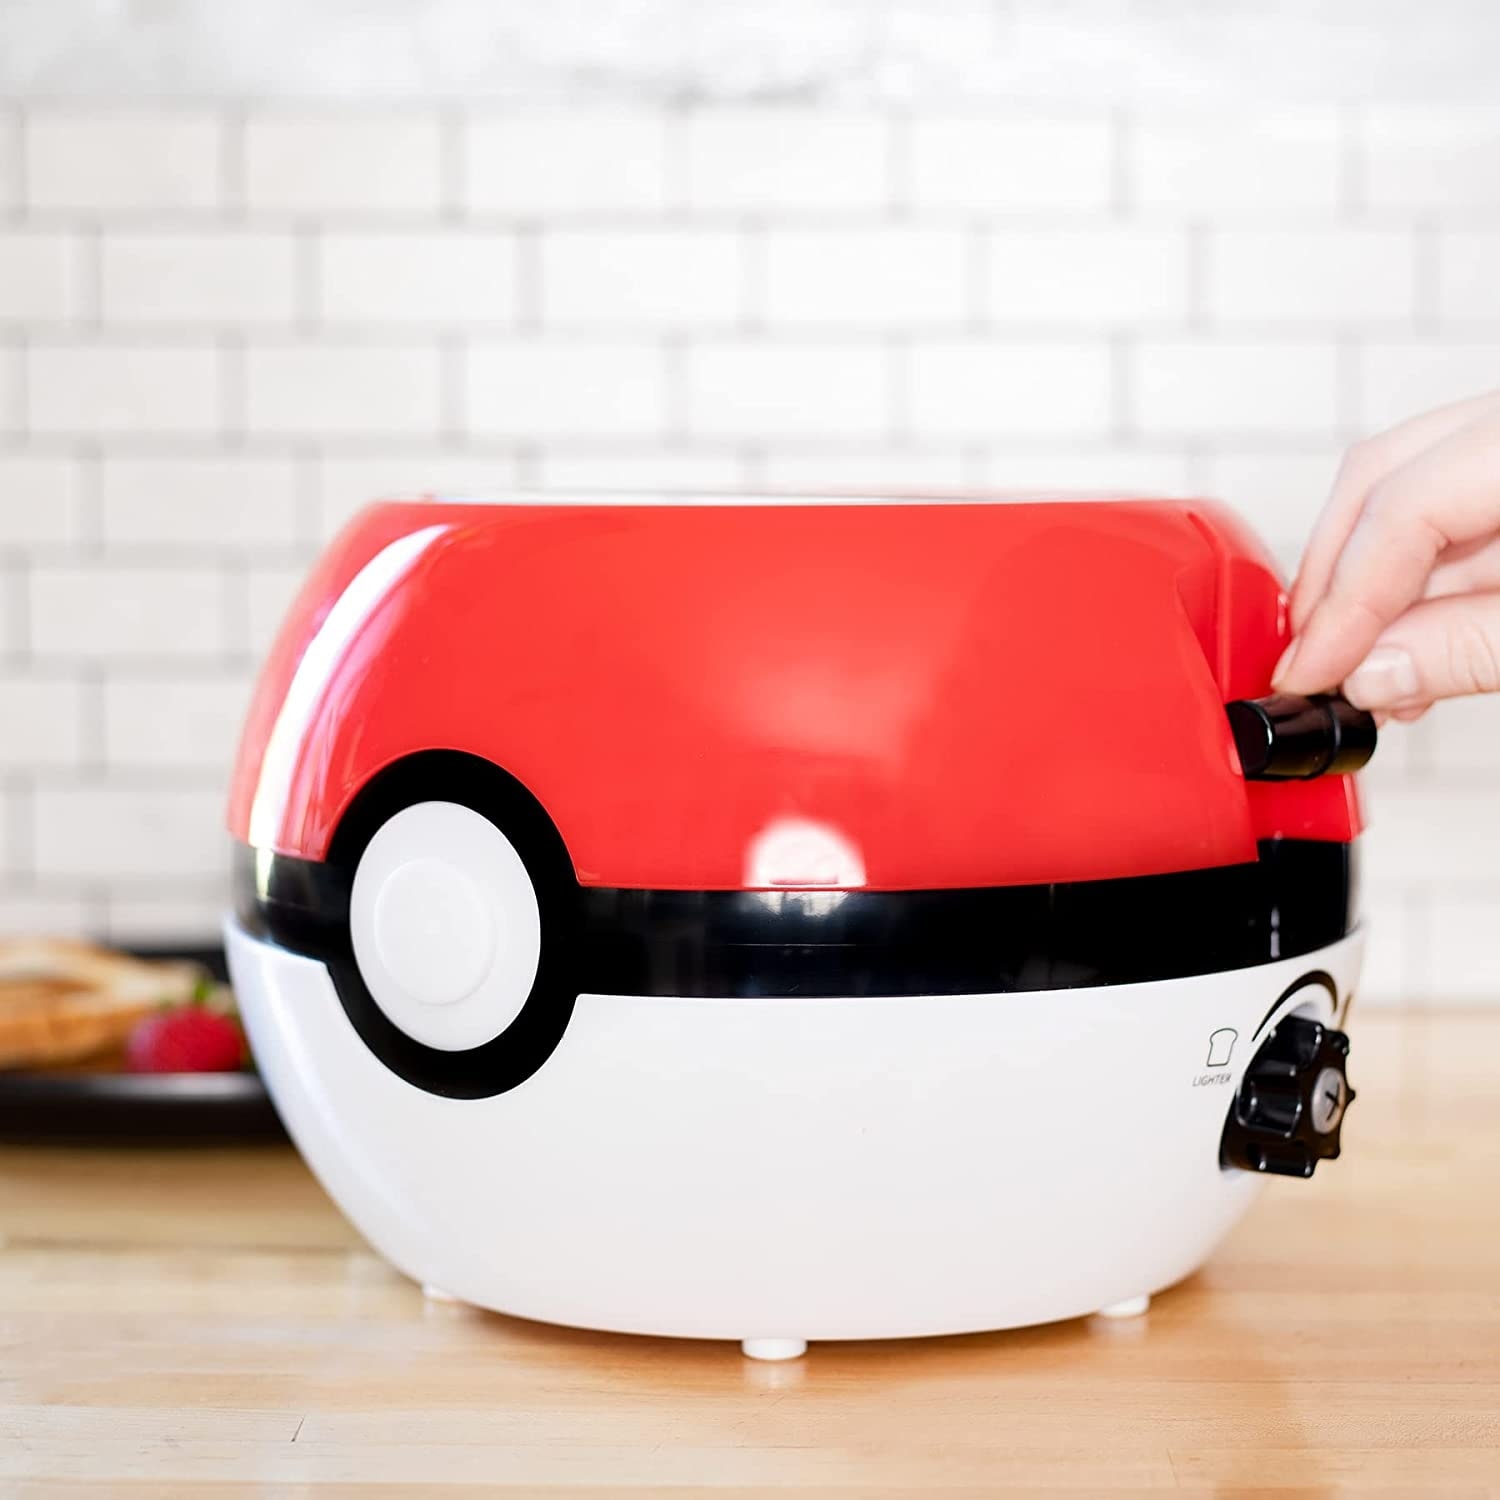 https://ak1.ostkcdn.com/images/products/is/images/direct/1614c79b3c87b7f62faff2959ff2f61403e25dc9/Pokemon-Pokeball-Halo-Toaster-%5Cu2013-Toasts-a-Pokeball-On-Your-Bread.jpg